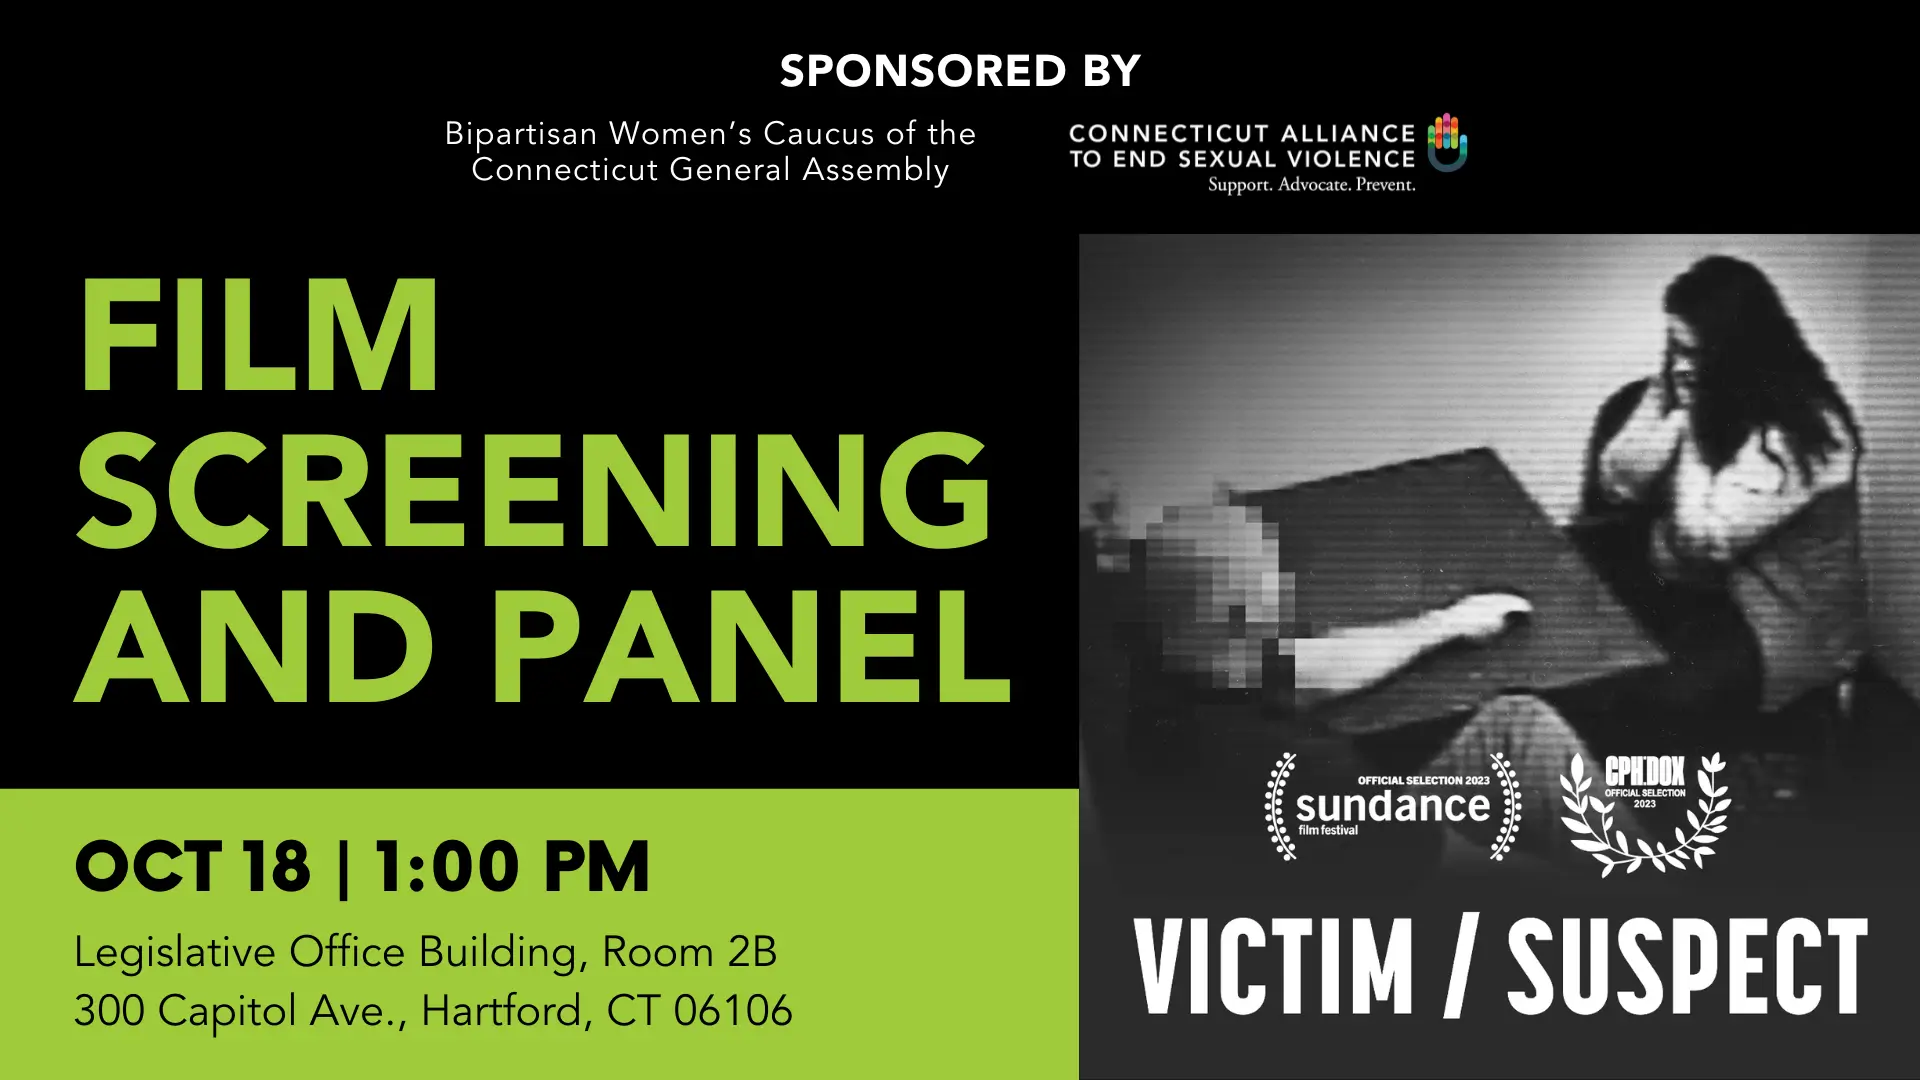 Film Screening and Panel in large text. To the right is an image from the film of a woman sitting at a table. Underneath are the laurels from two film festivals.